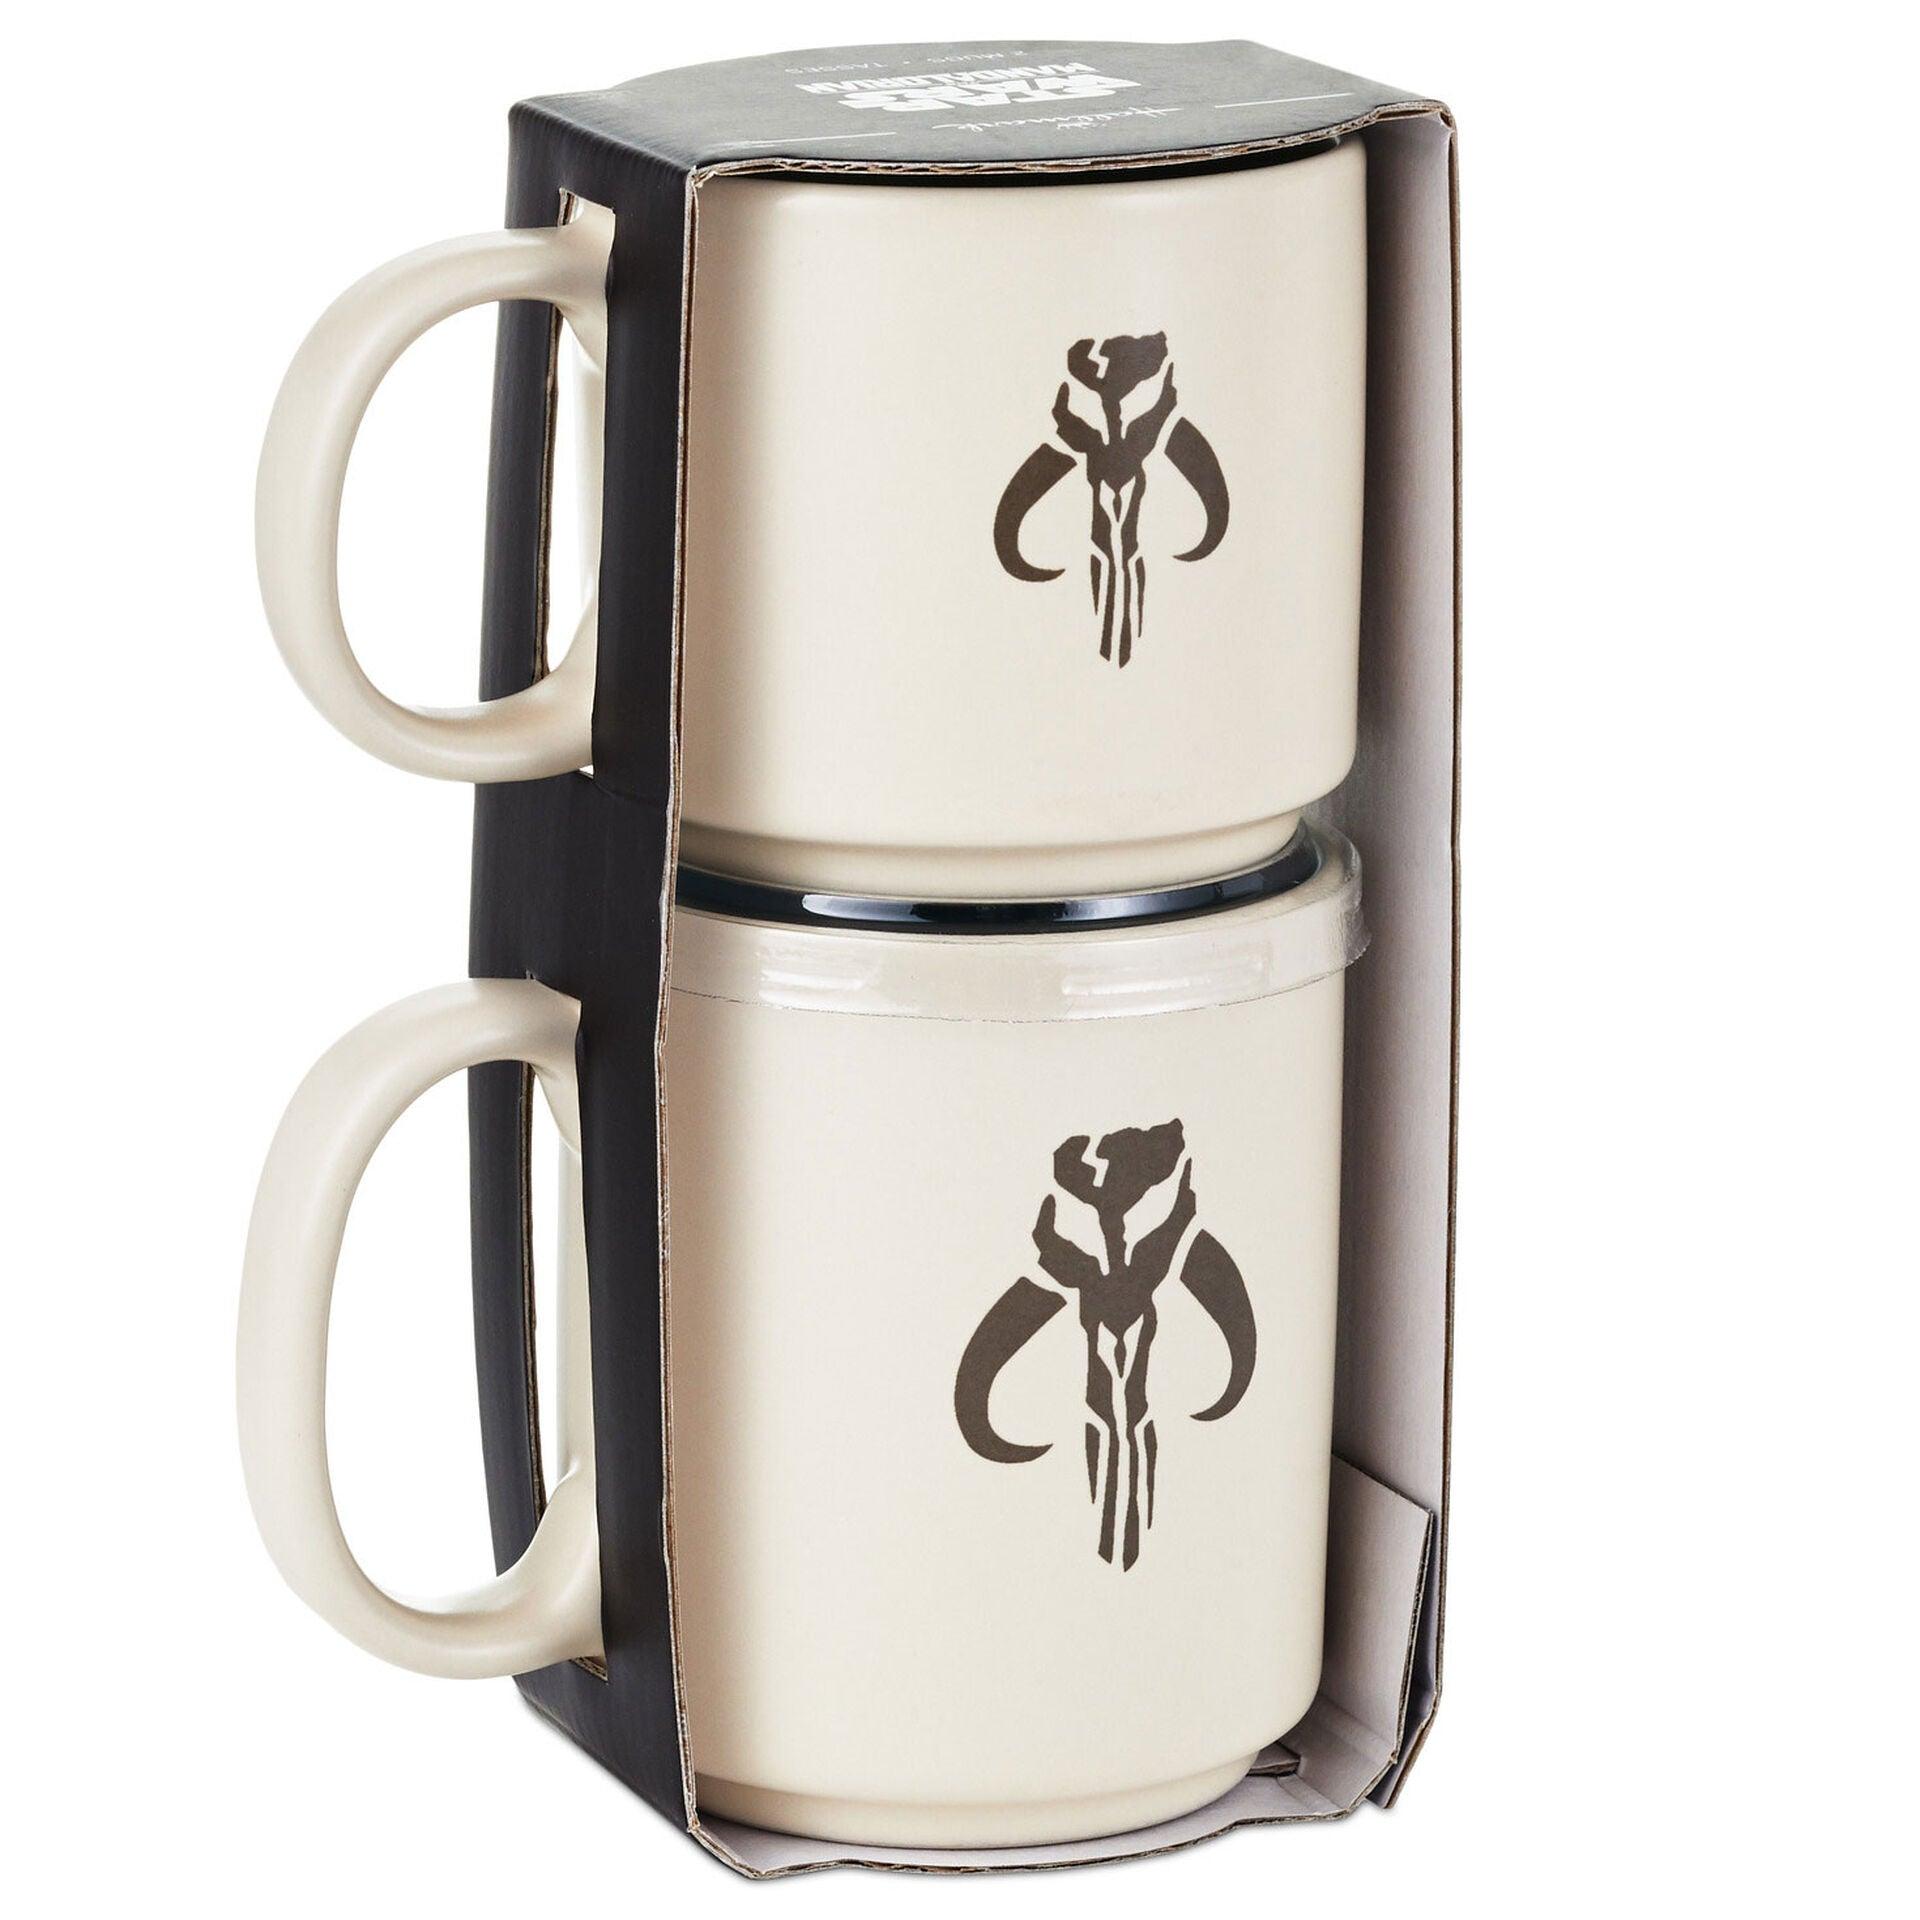 The Mandalorian and Grogu (Star Wars) Single Cup Coffee Maker with